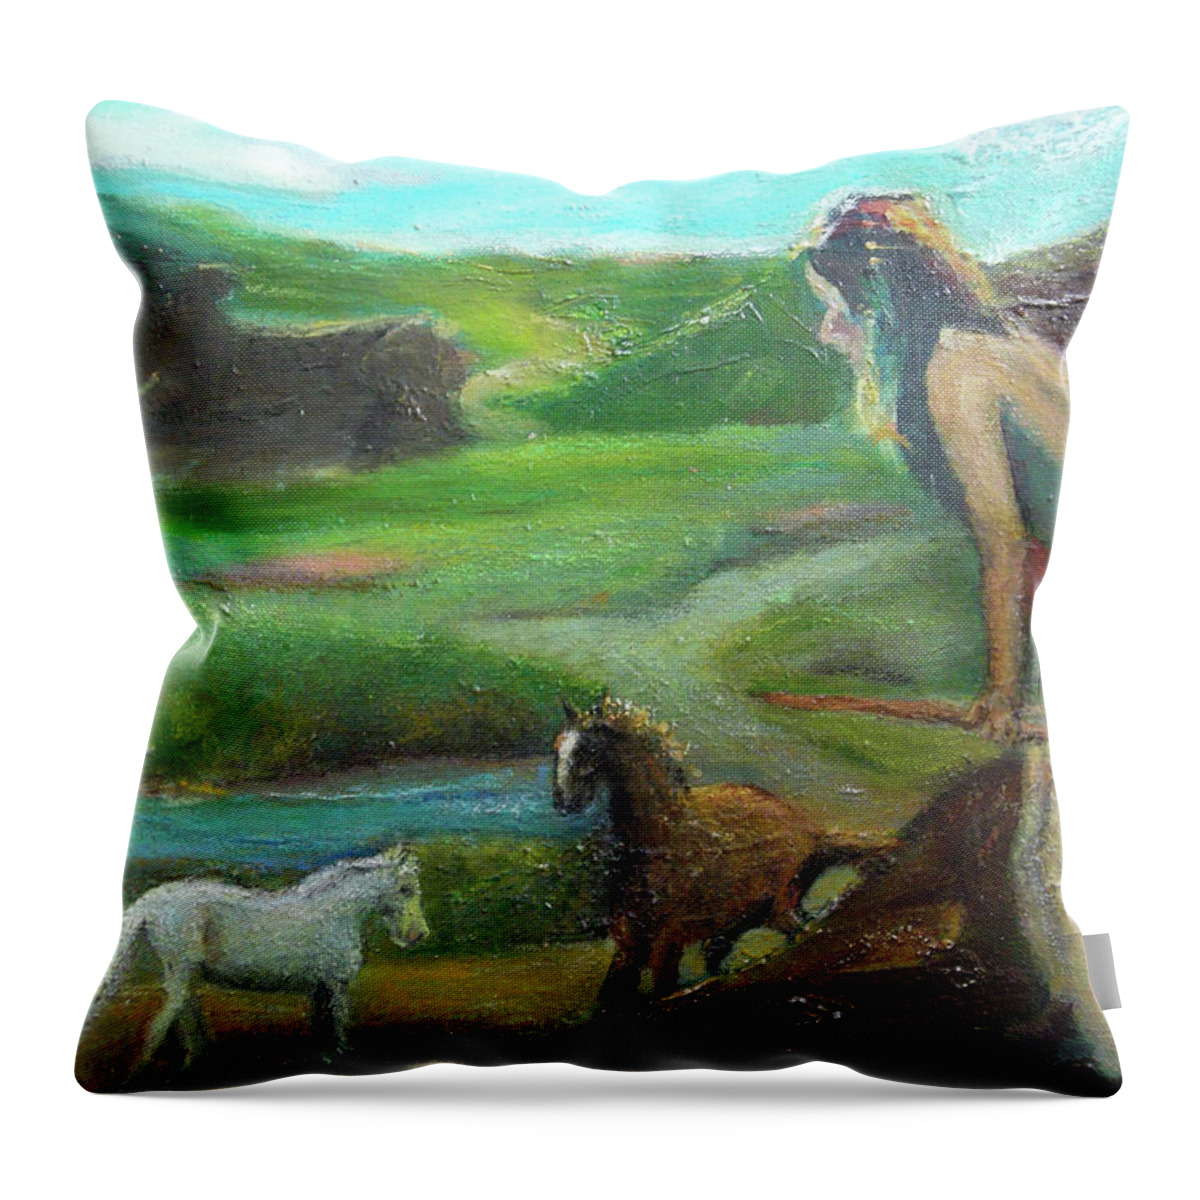 Native American Throw Pillow featuring the painting The Scout by Susan Esbensen